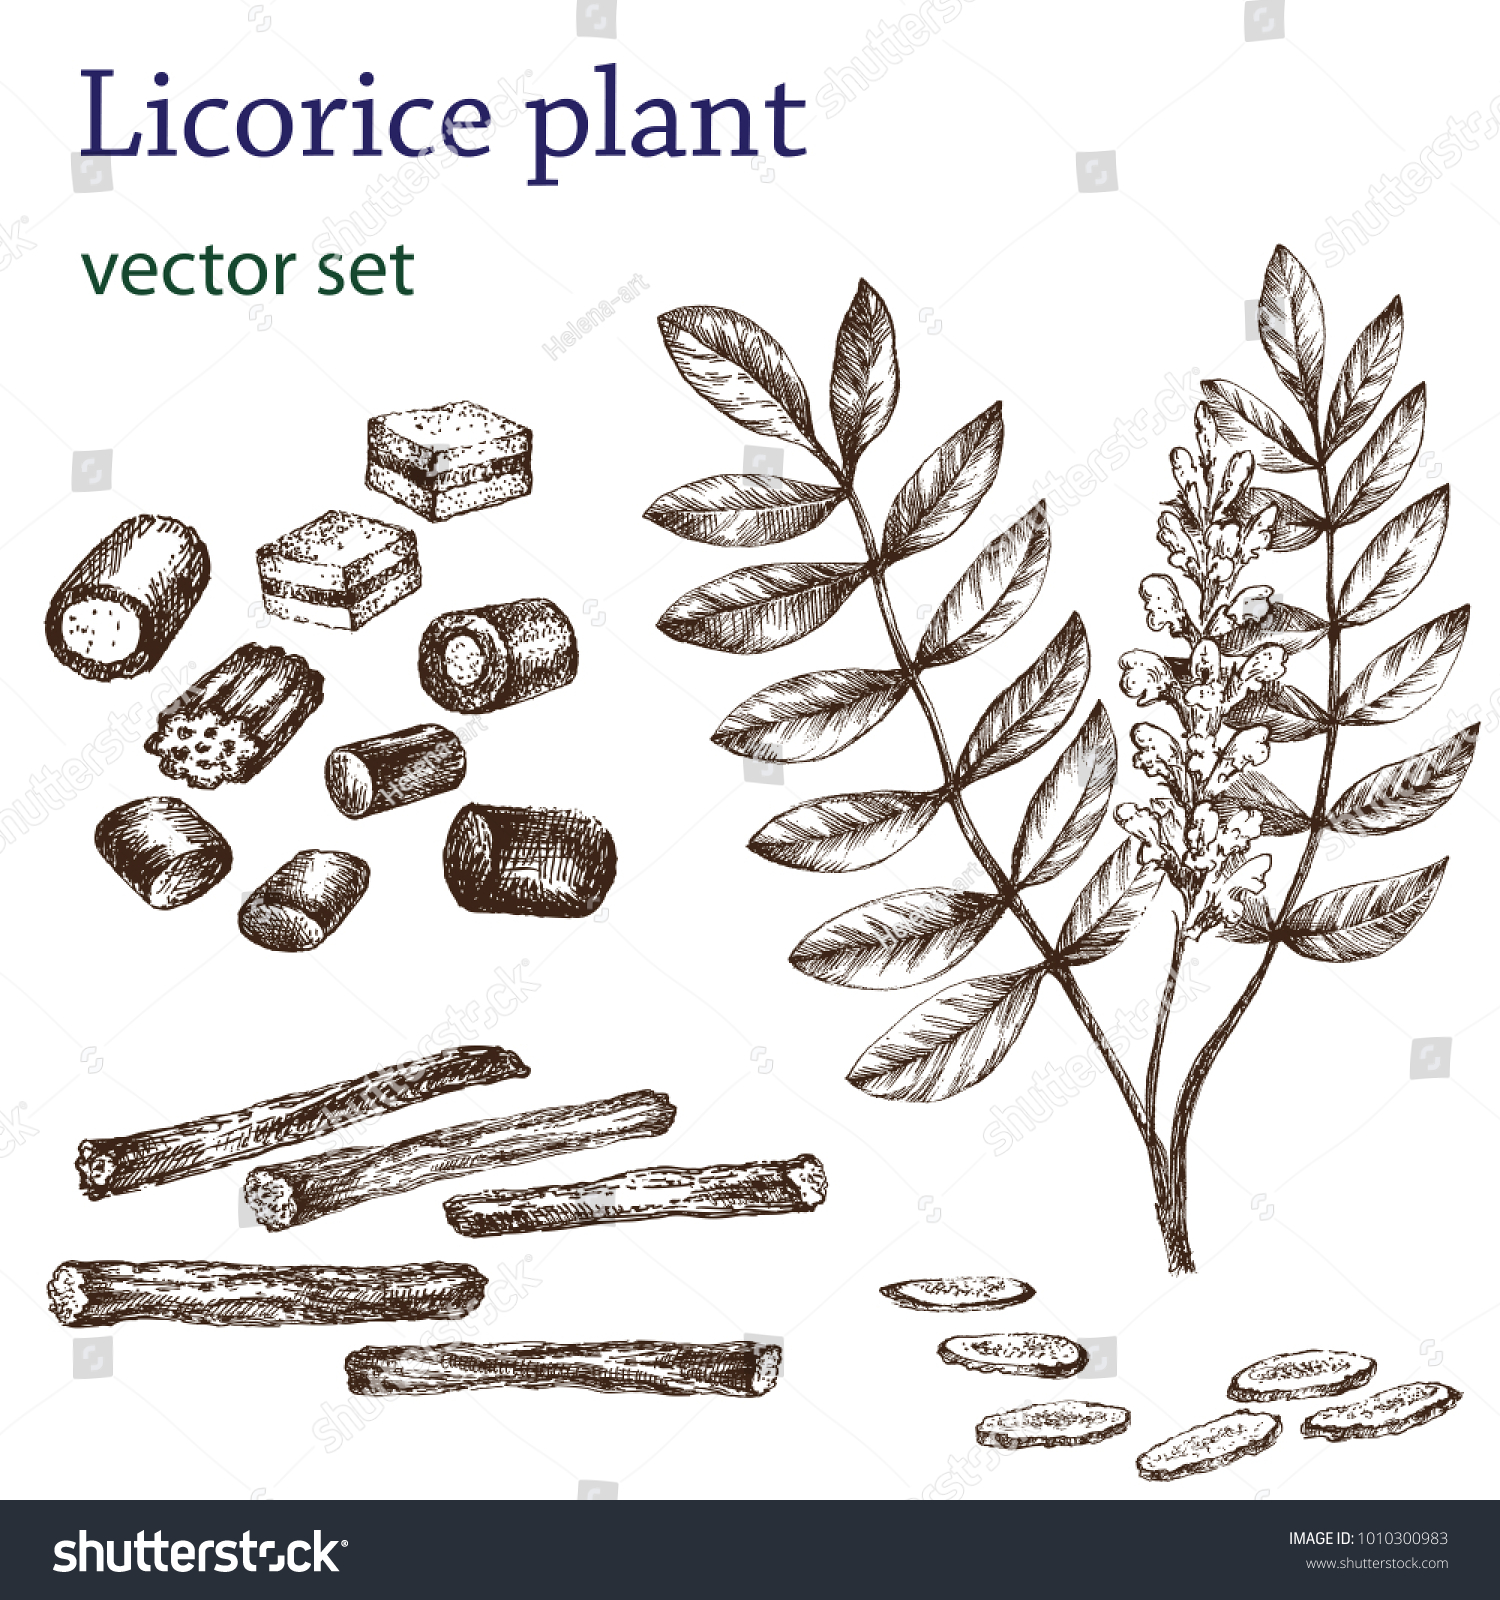 Sketch Licorice Vintage Style Botanical Drawing Stock Vector (Royalty